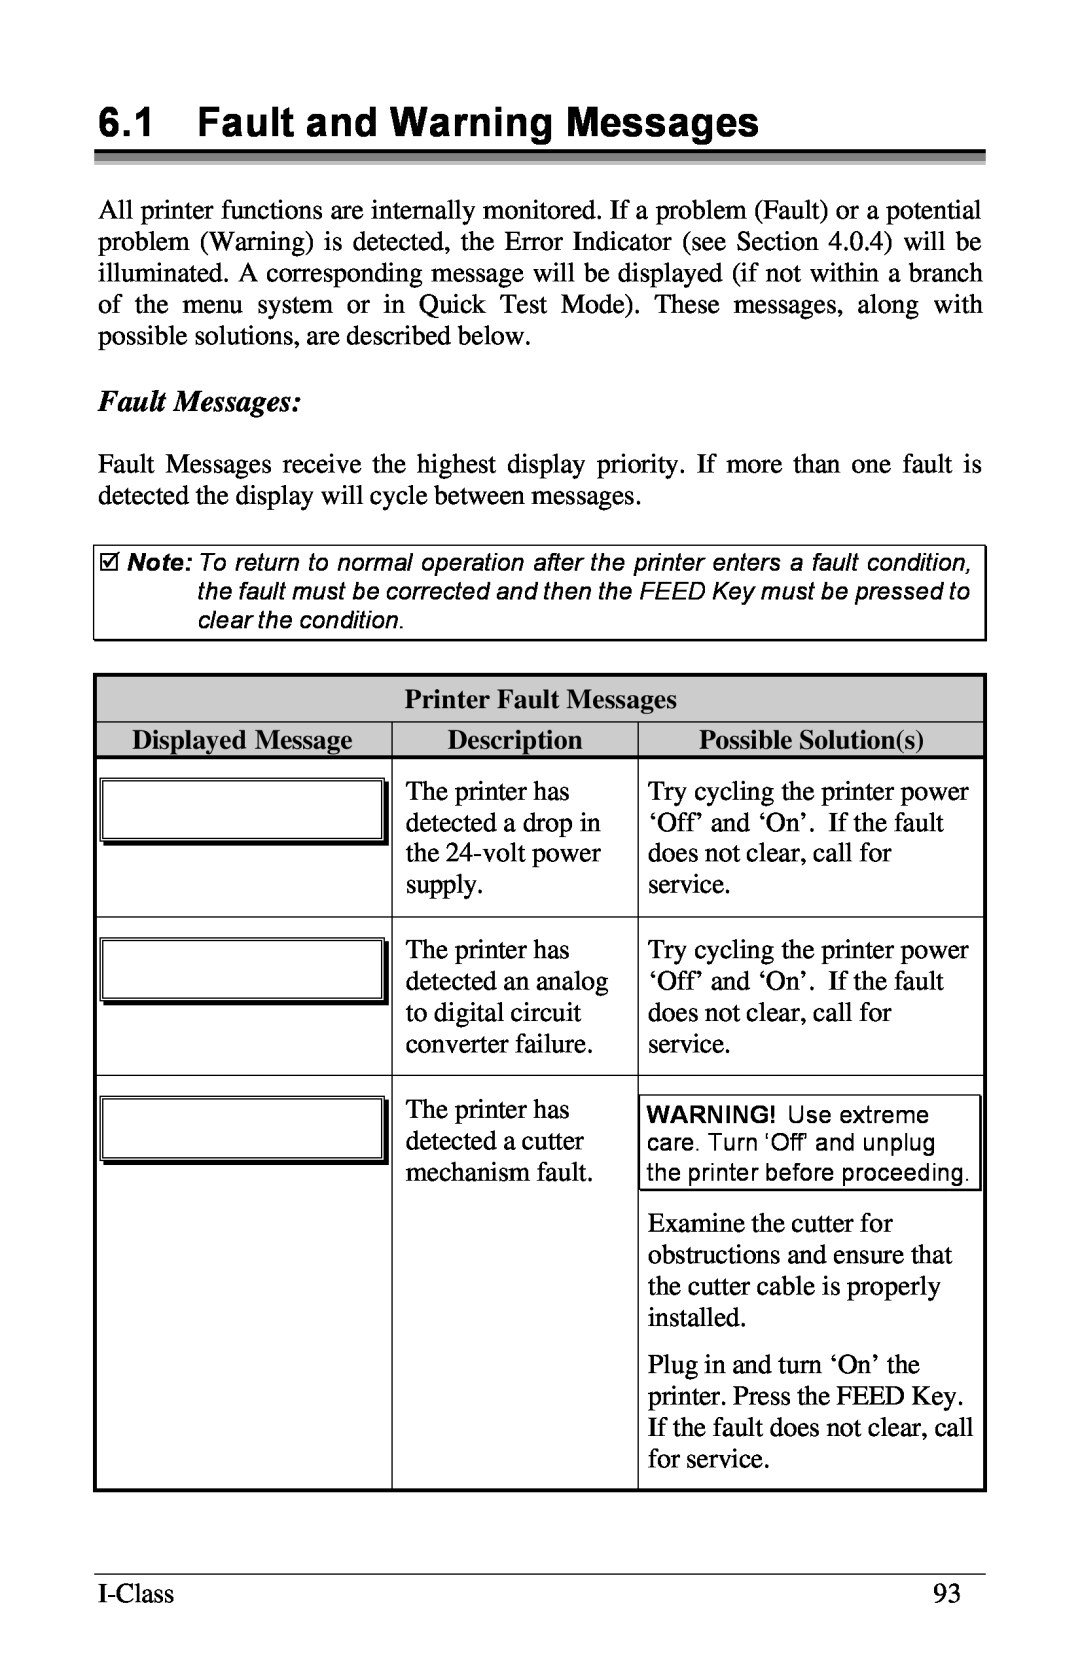 Xerox I Class manual 6.1Fault and Warning Messages, Printer Fault Messages, Displayed Message, Description 